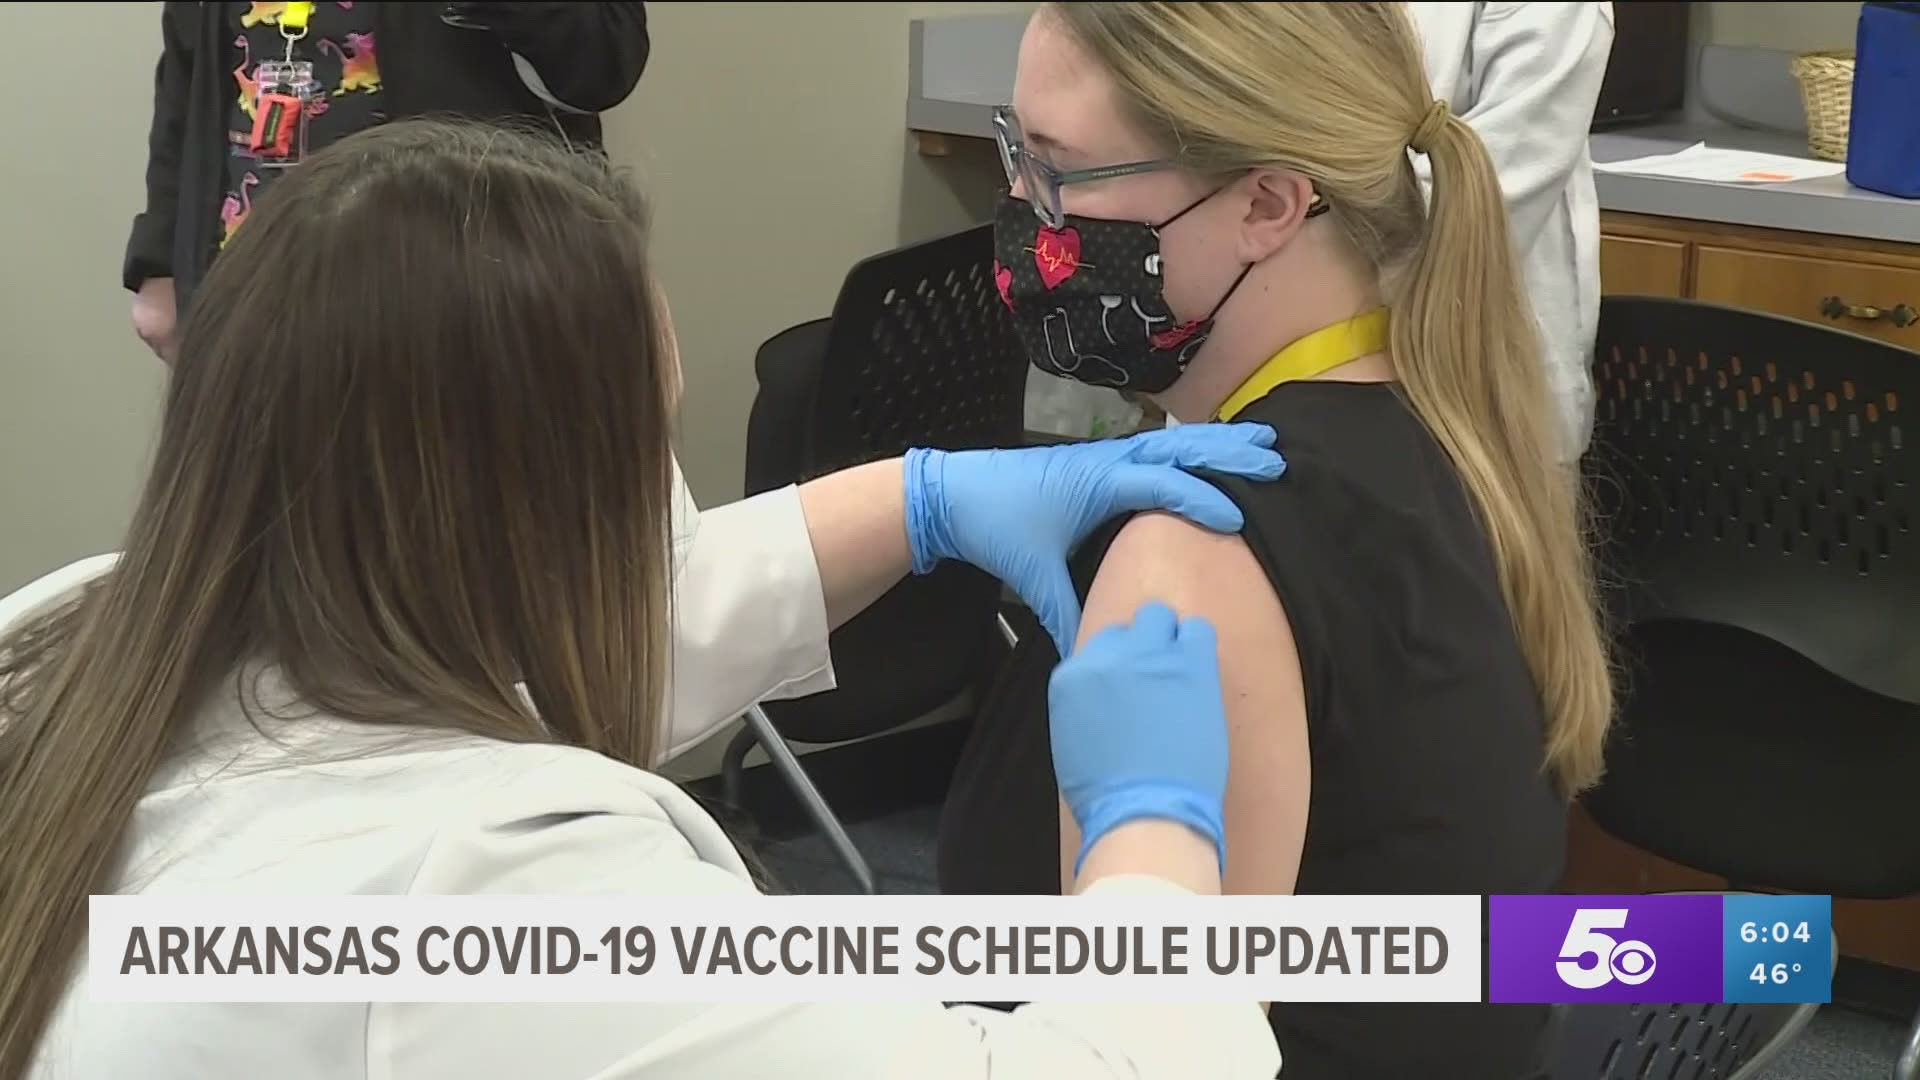 The state will move into part of Phase 1-B next week which includes vaccinating those 70 and older as well as teachers. https://bit.ly/3nEXlL4